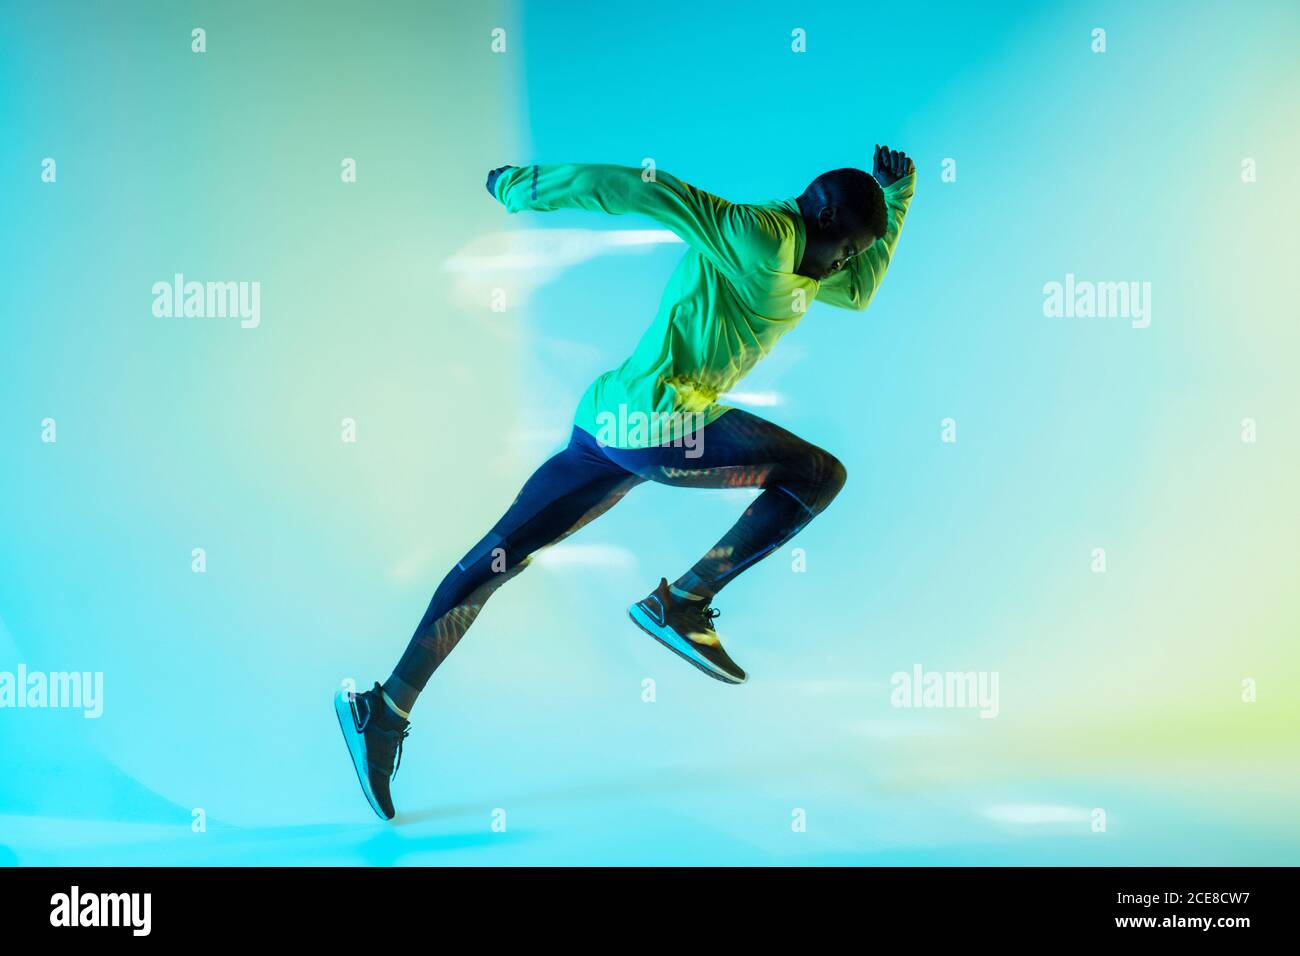 Full body side view of young African American male runner in colorful tracksuit sprinting from start position in studio with bright neon illumination Stock Photo